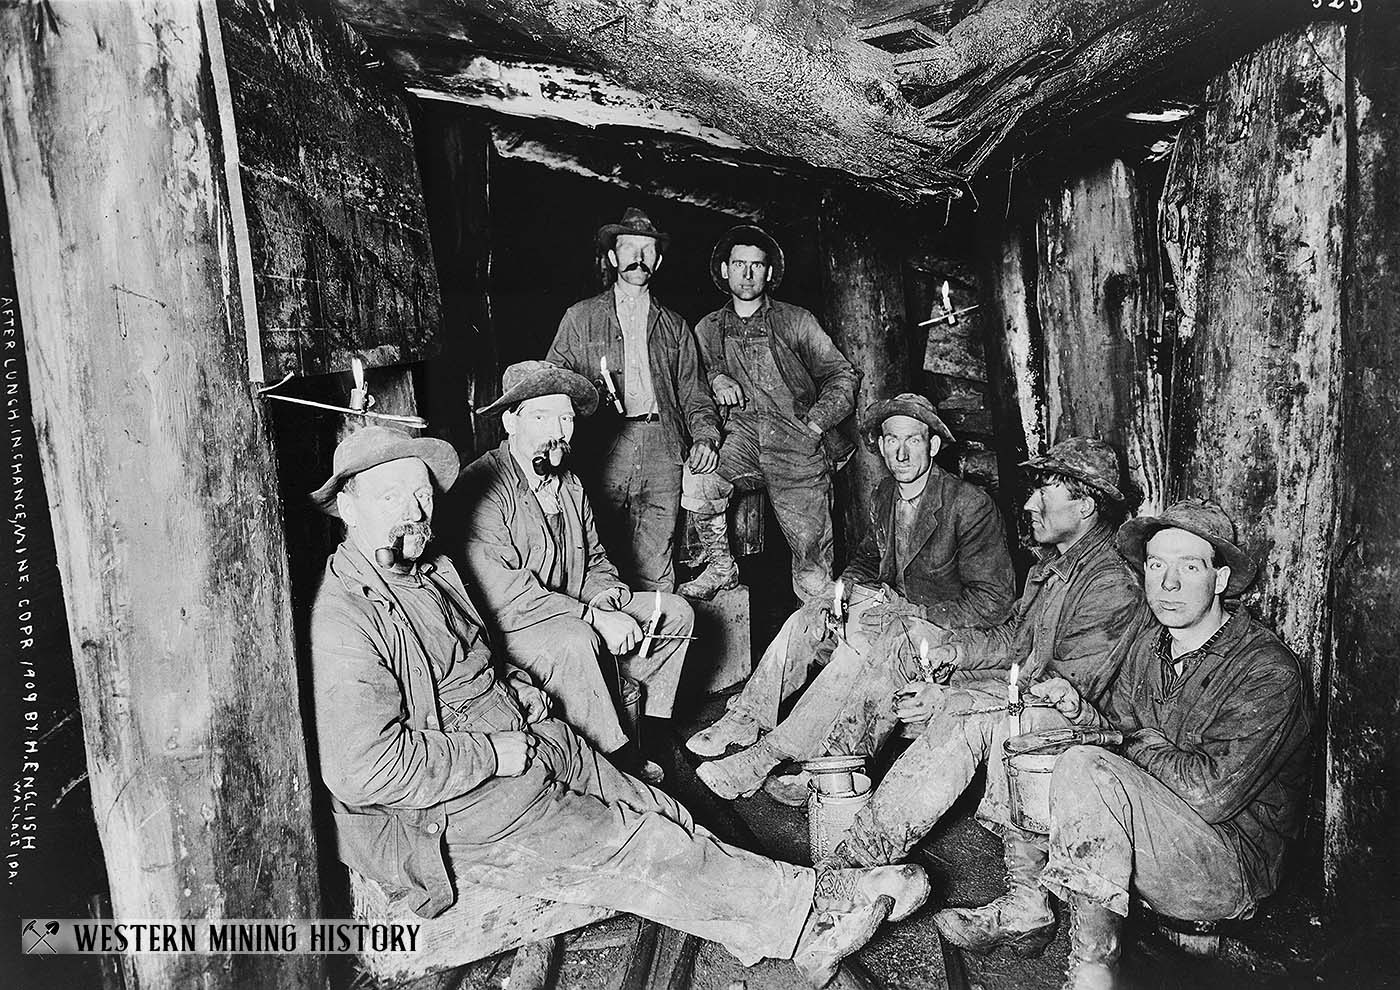 Lunch in Chance Mine - Silver Valley Idaho 1909